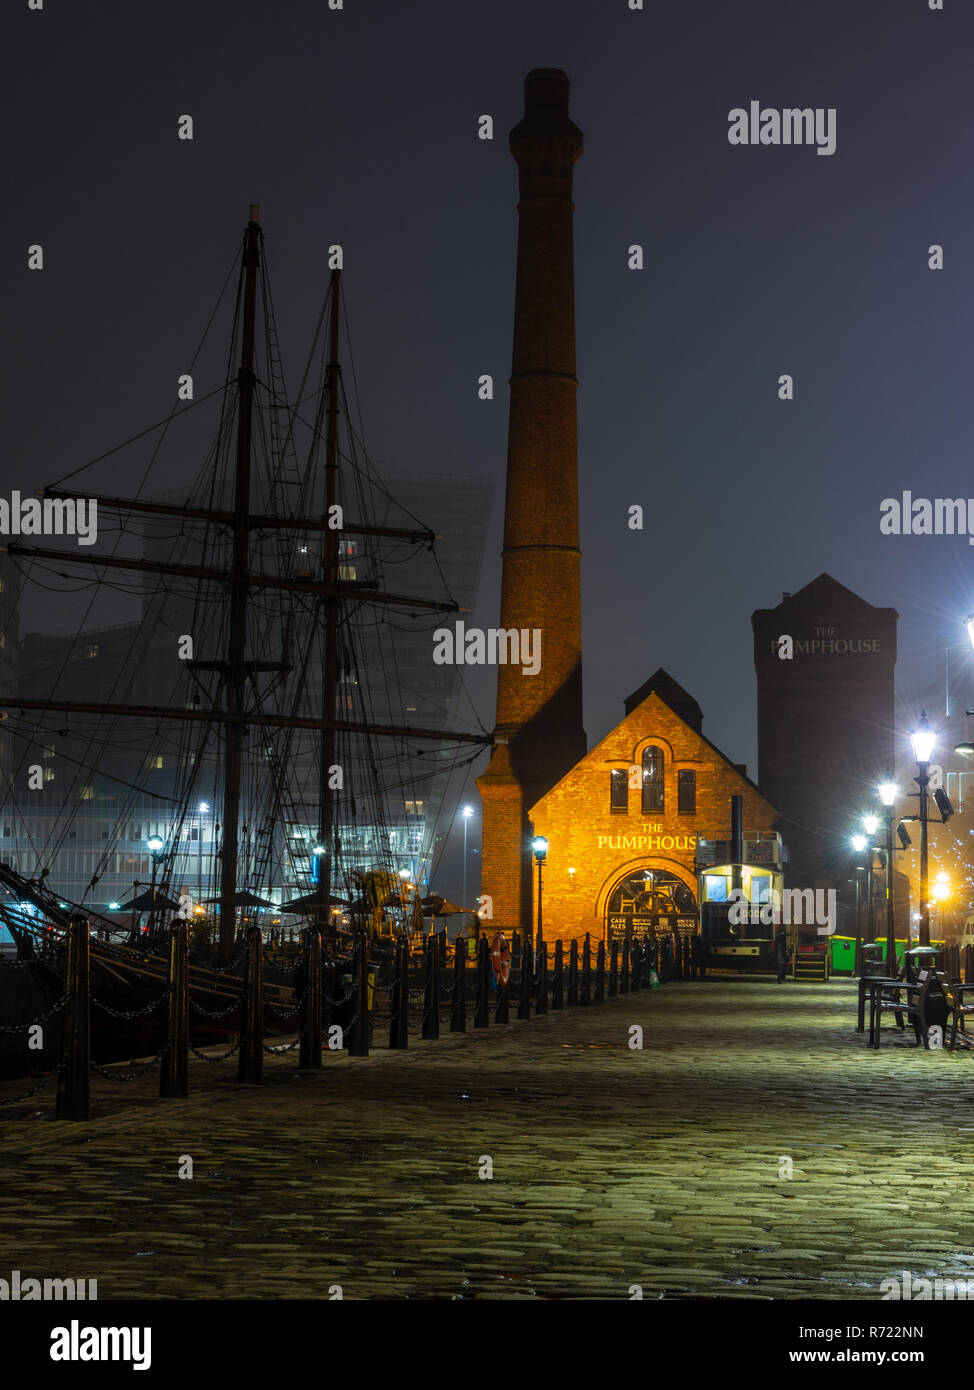 Liverpool, England, UK - November 1, 2015: The Pump House of Liverpool's regenerated docks is lit on a foggy night. Stock Photo